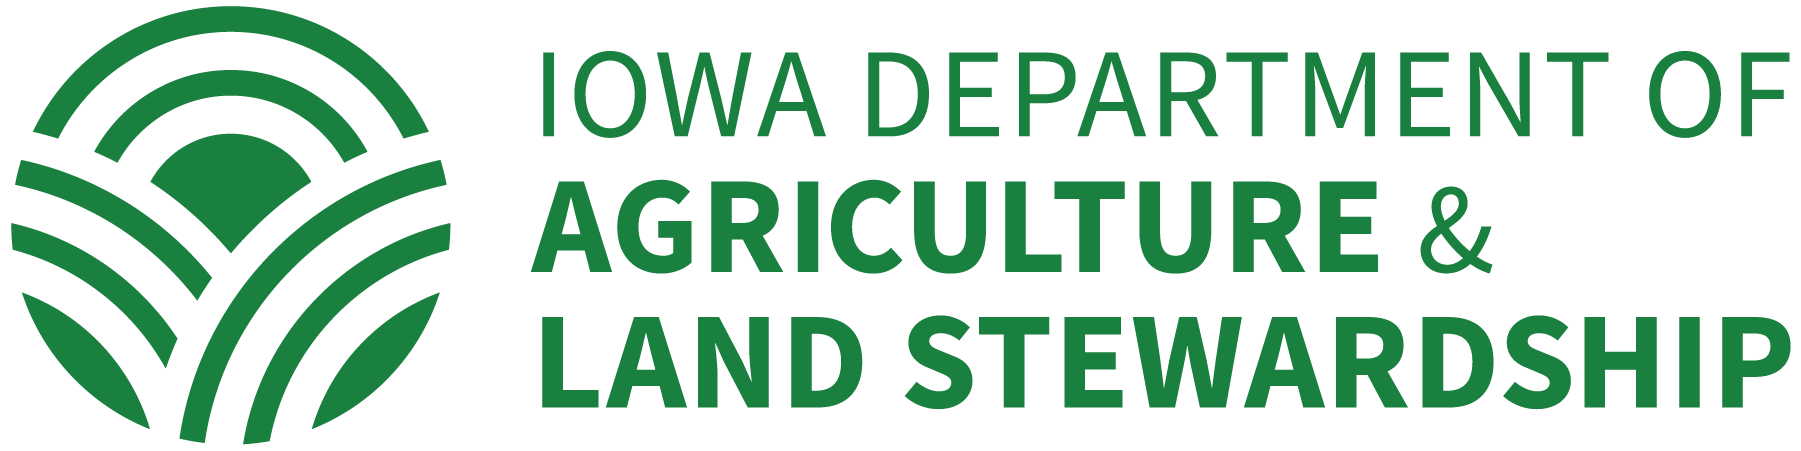 Iowa Department of Agriculture and Land Stewardship Logo